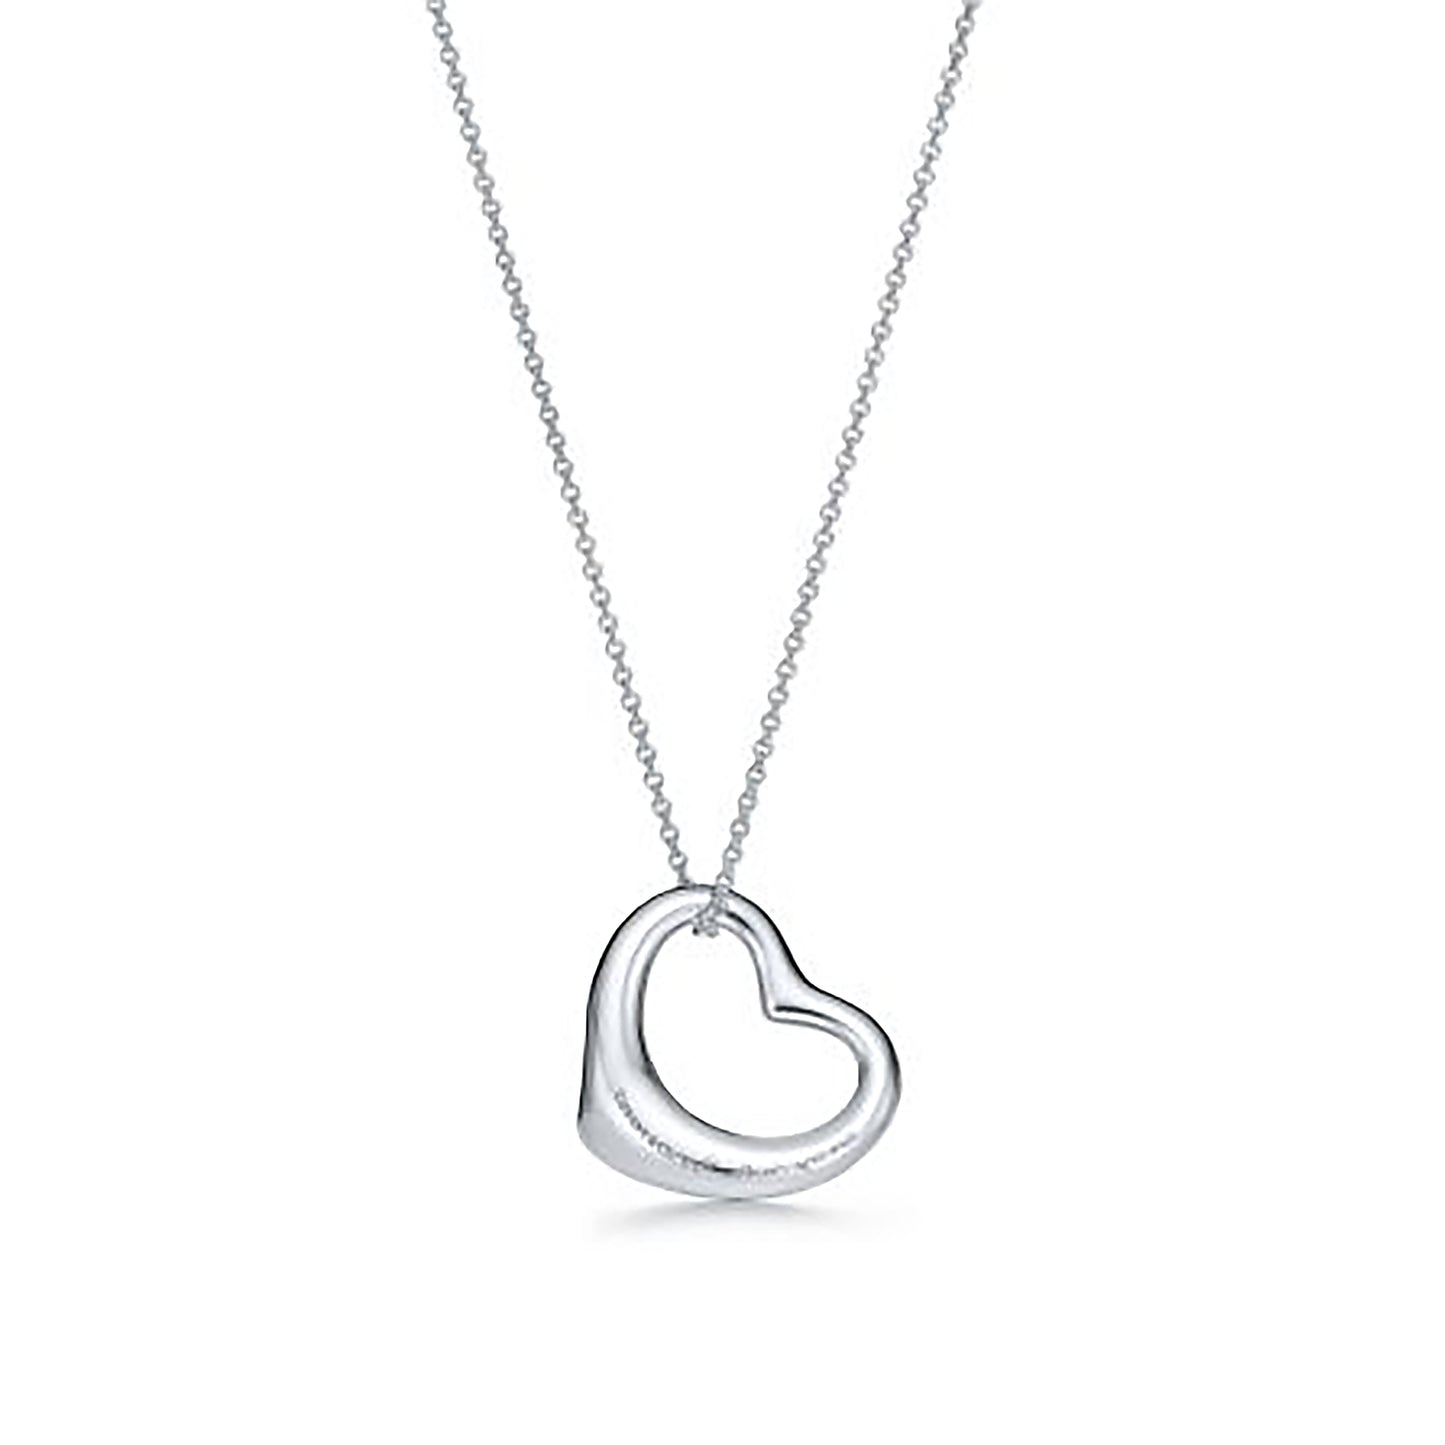 Open Heart Pearl Lariat Necklace | Michael E. Minden Diamond Jewelers –  Michael E. Minden Diamond Jewelers - The Diamond & Wedding Ring Store